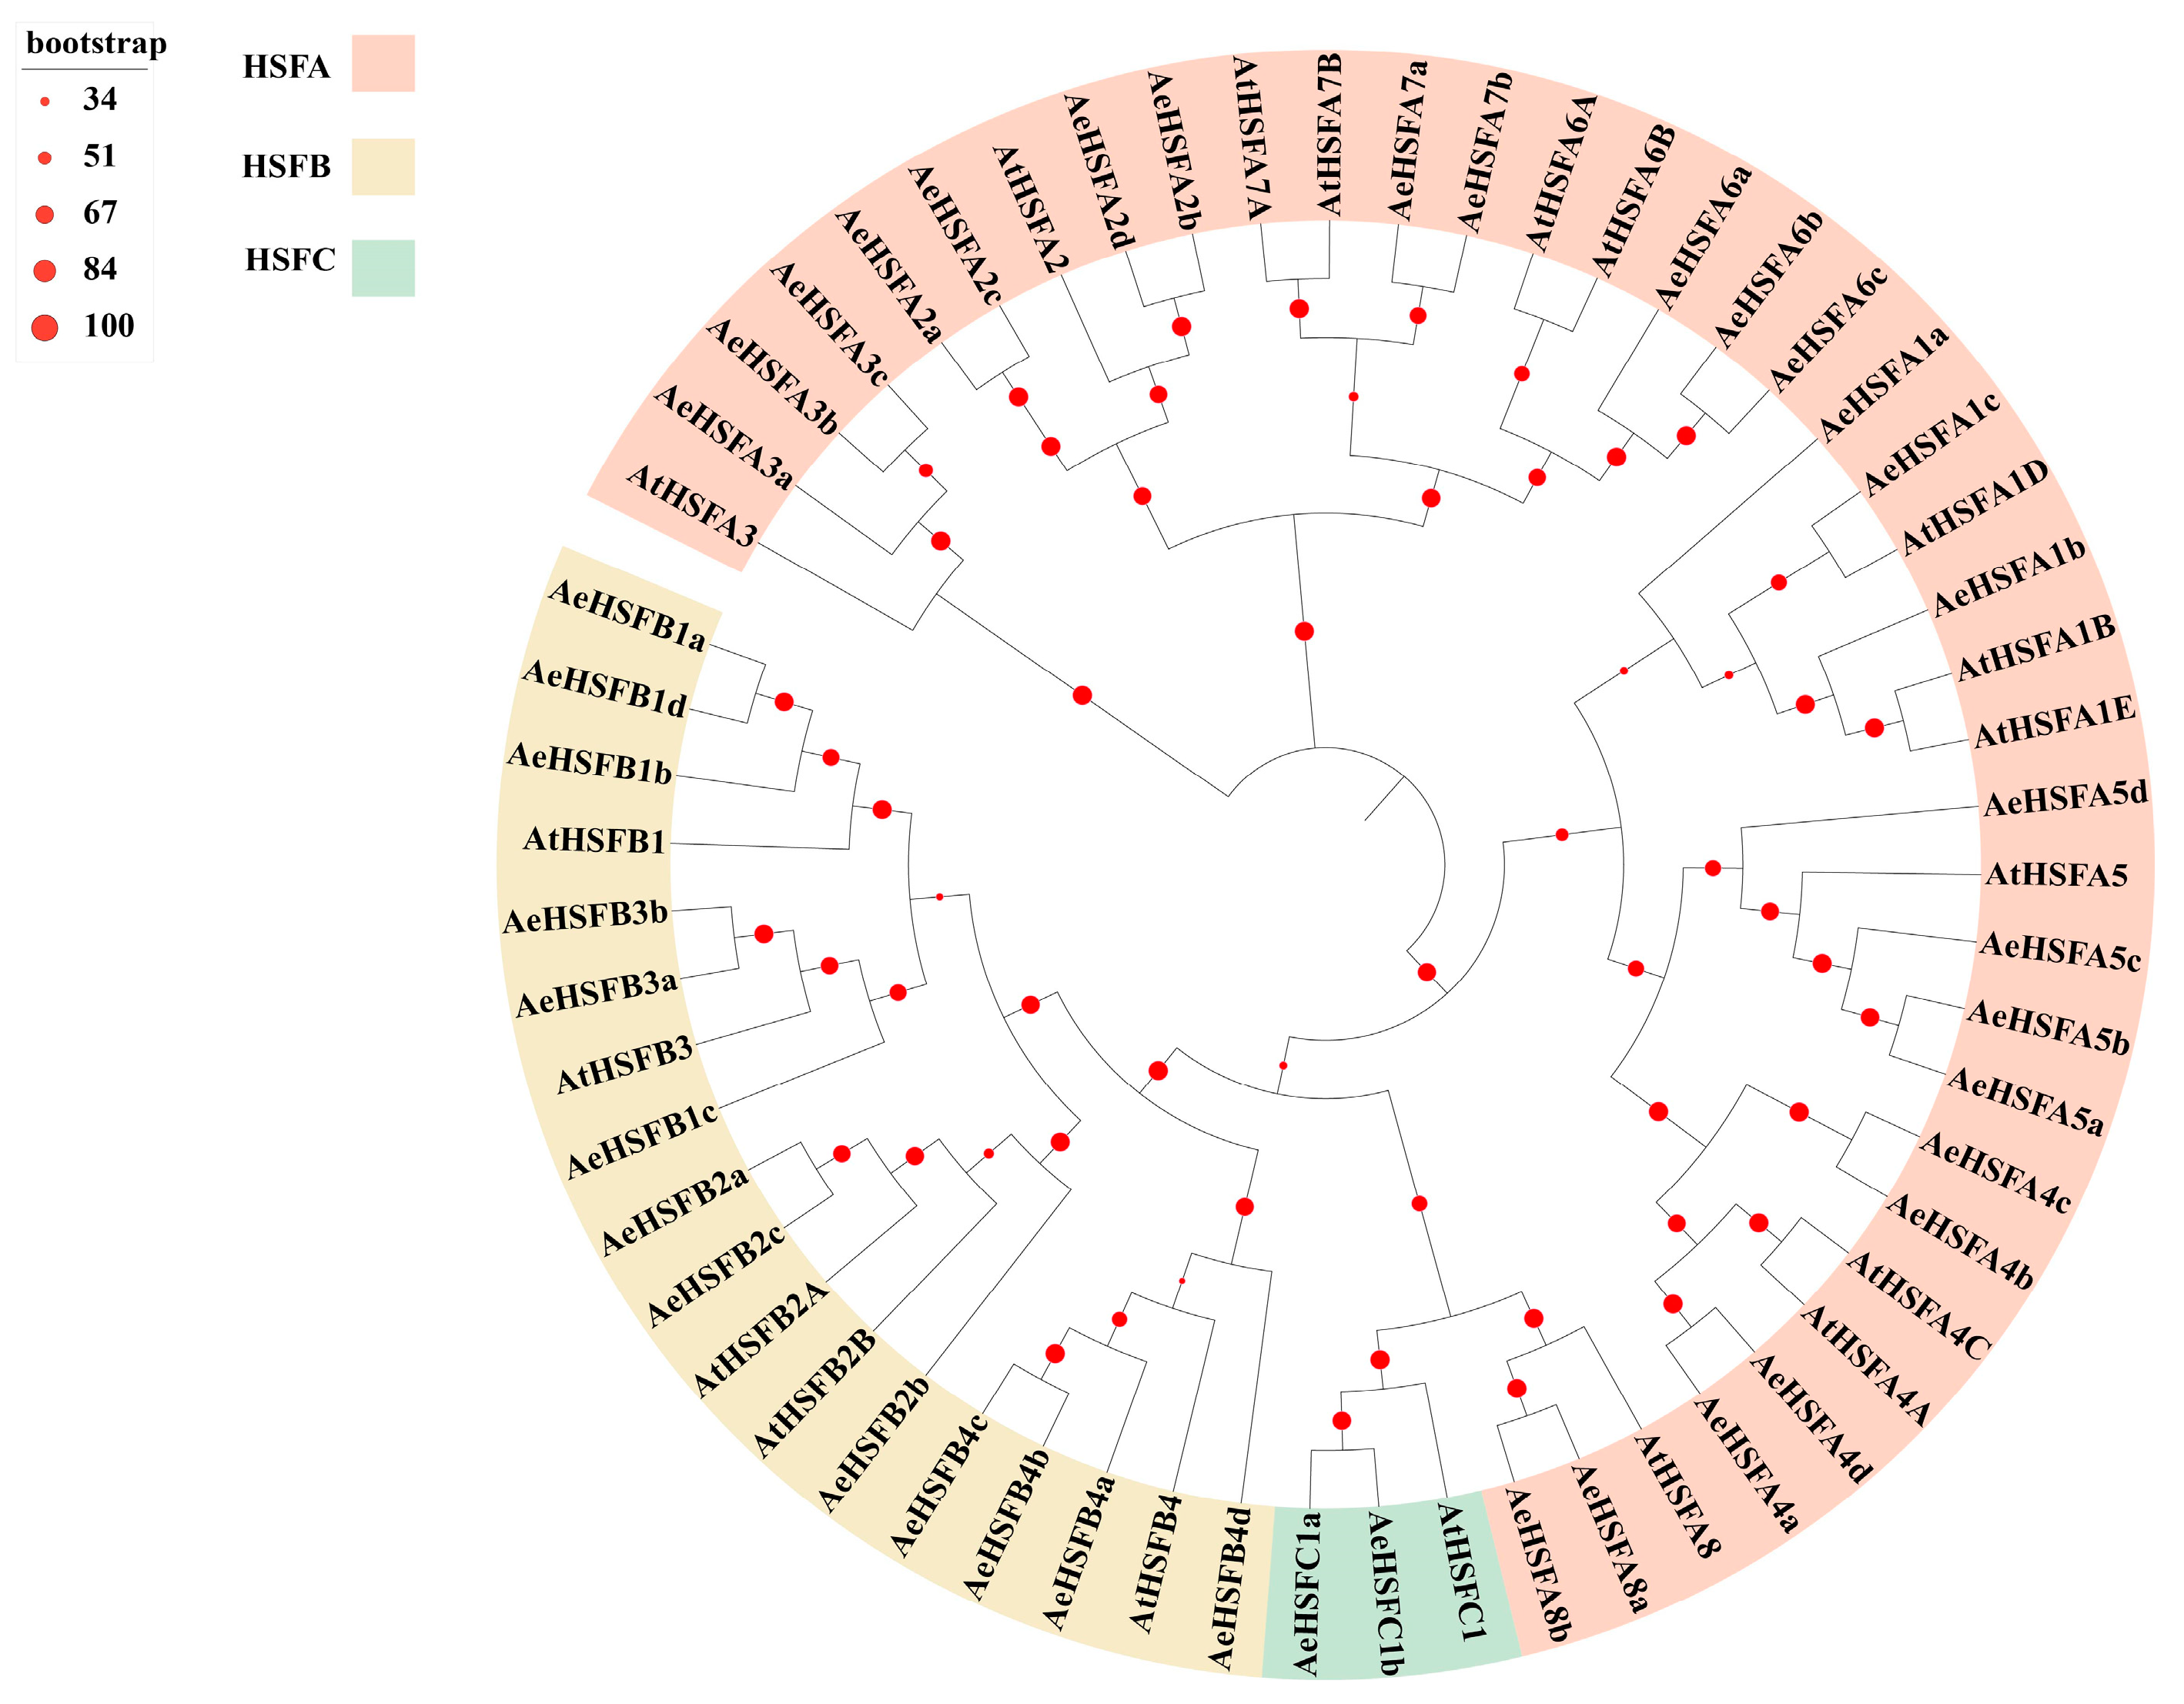 IJMS | Free Full-Text | Genome-Wide Identification of HSF Gene 